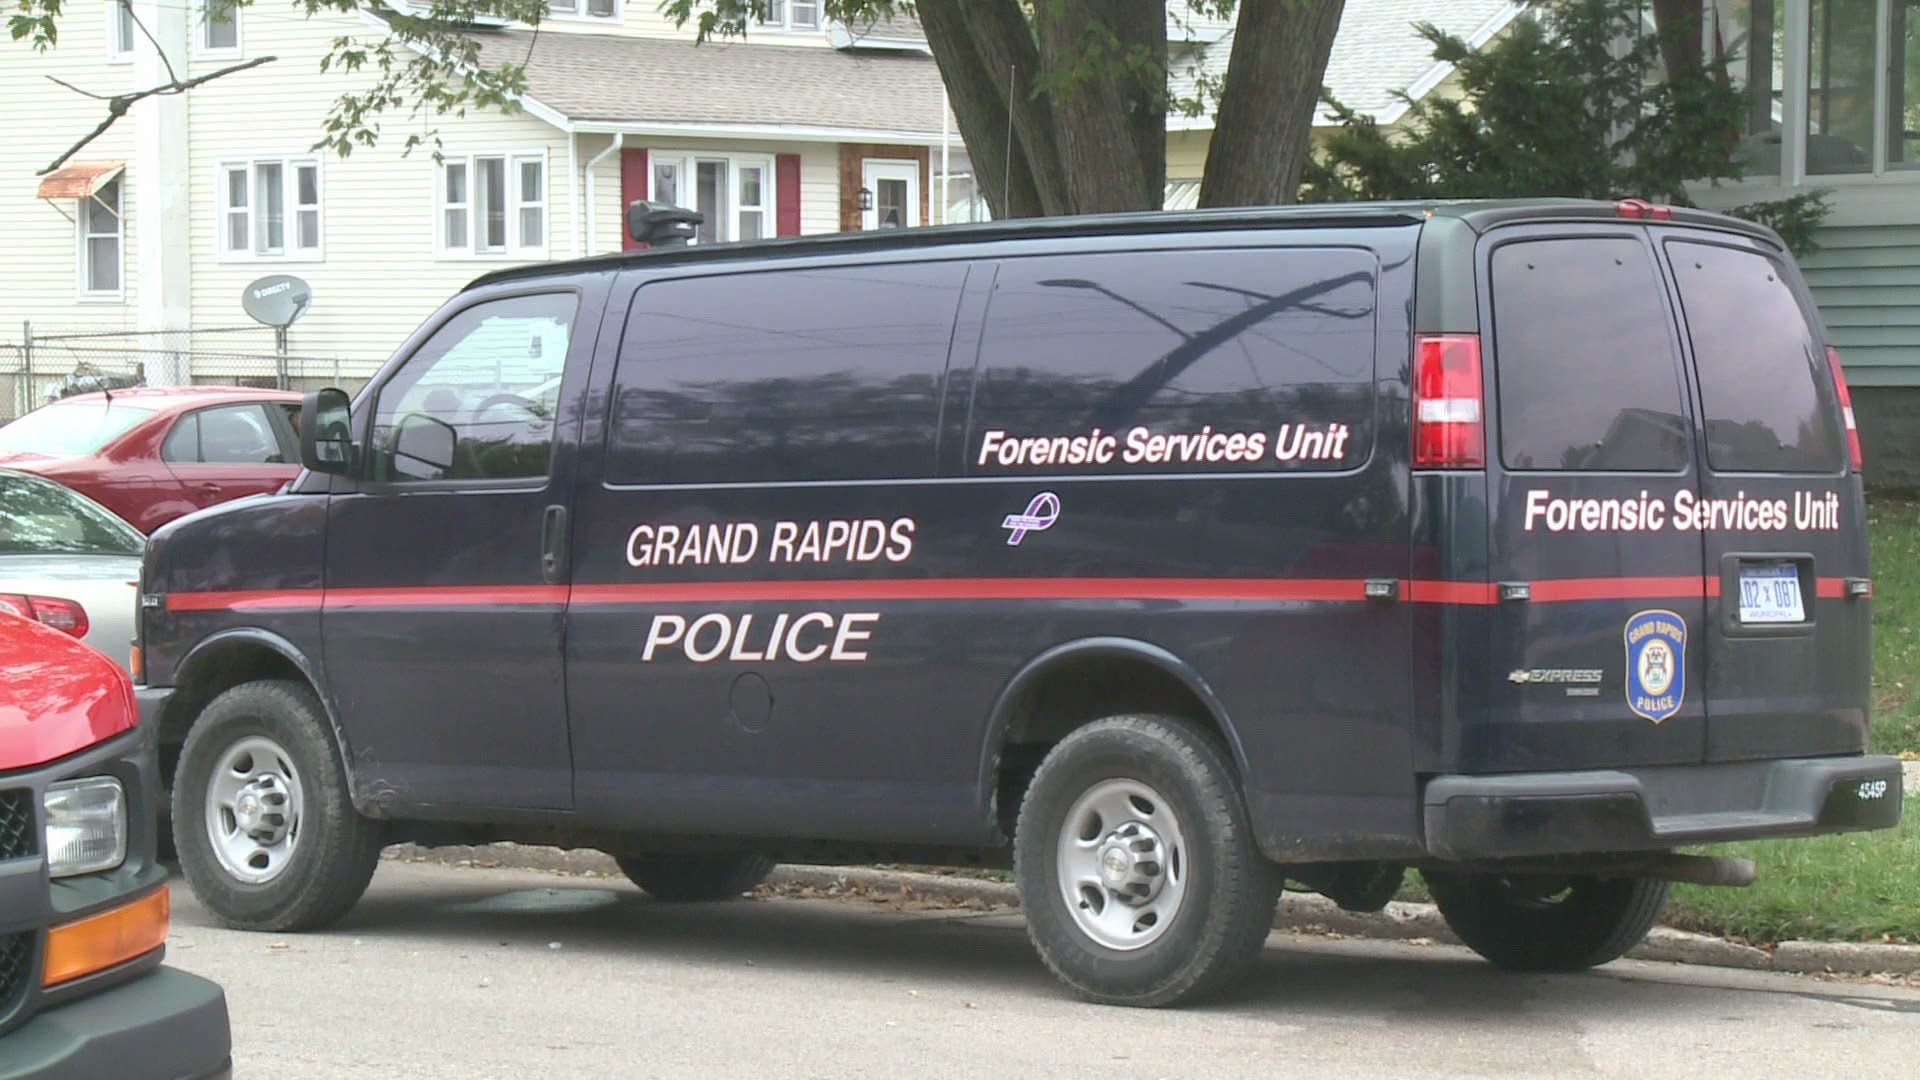 The death of a man found inside a burning home on the city’s Northeast Side has been ruled a homicide, Grand Rapids police said.